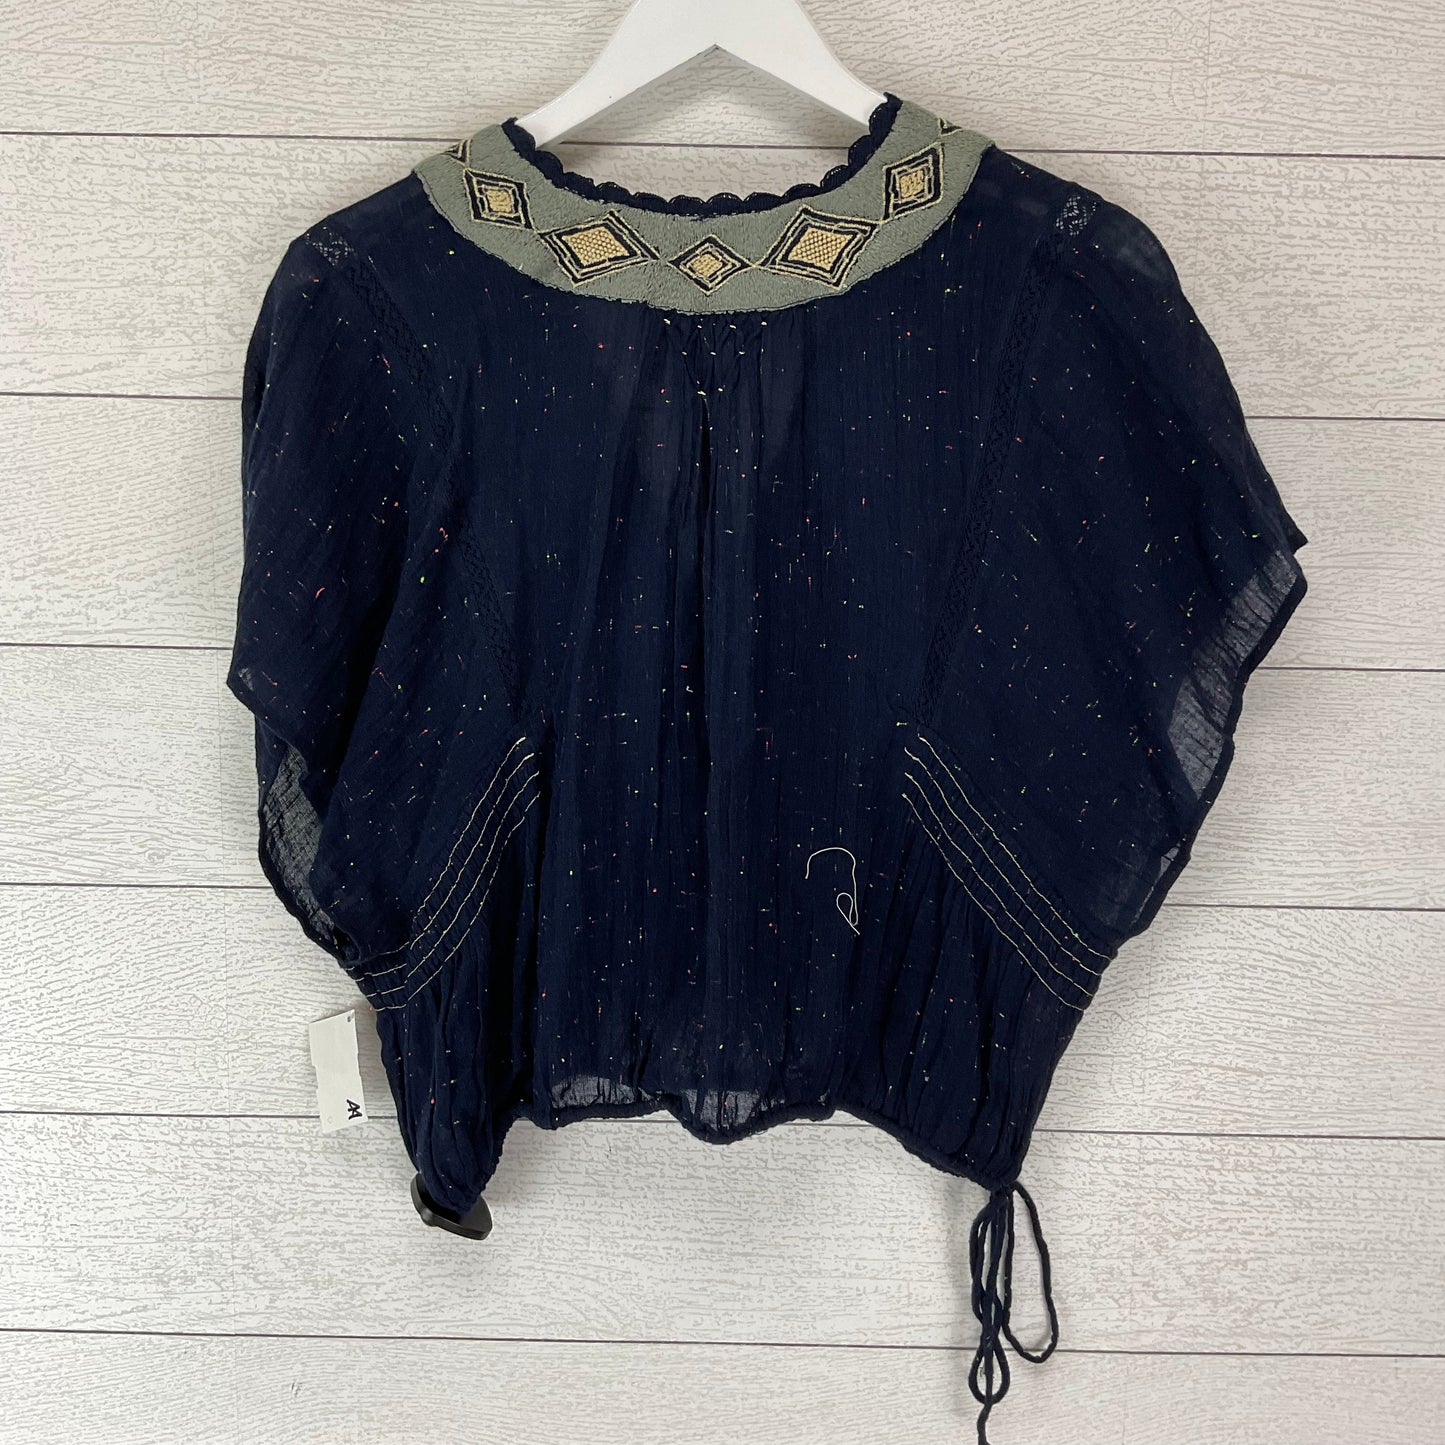 Navy Top Short Sleeve Free People, Size S